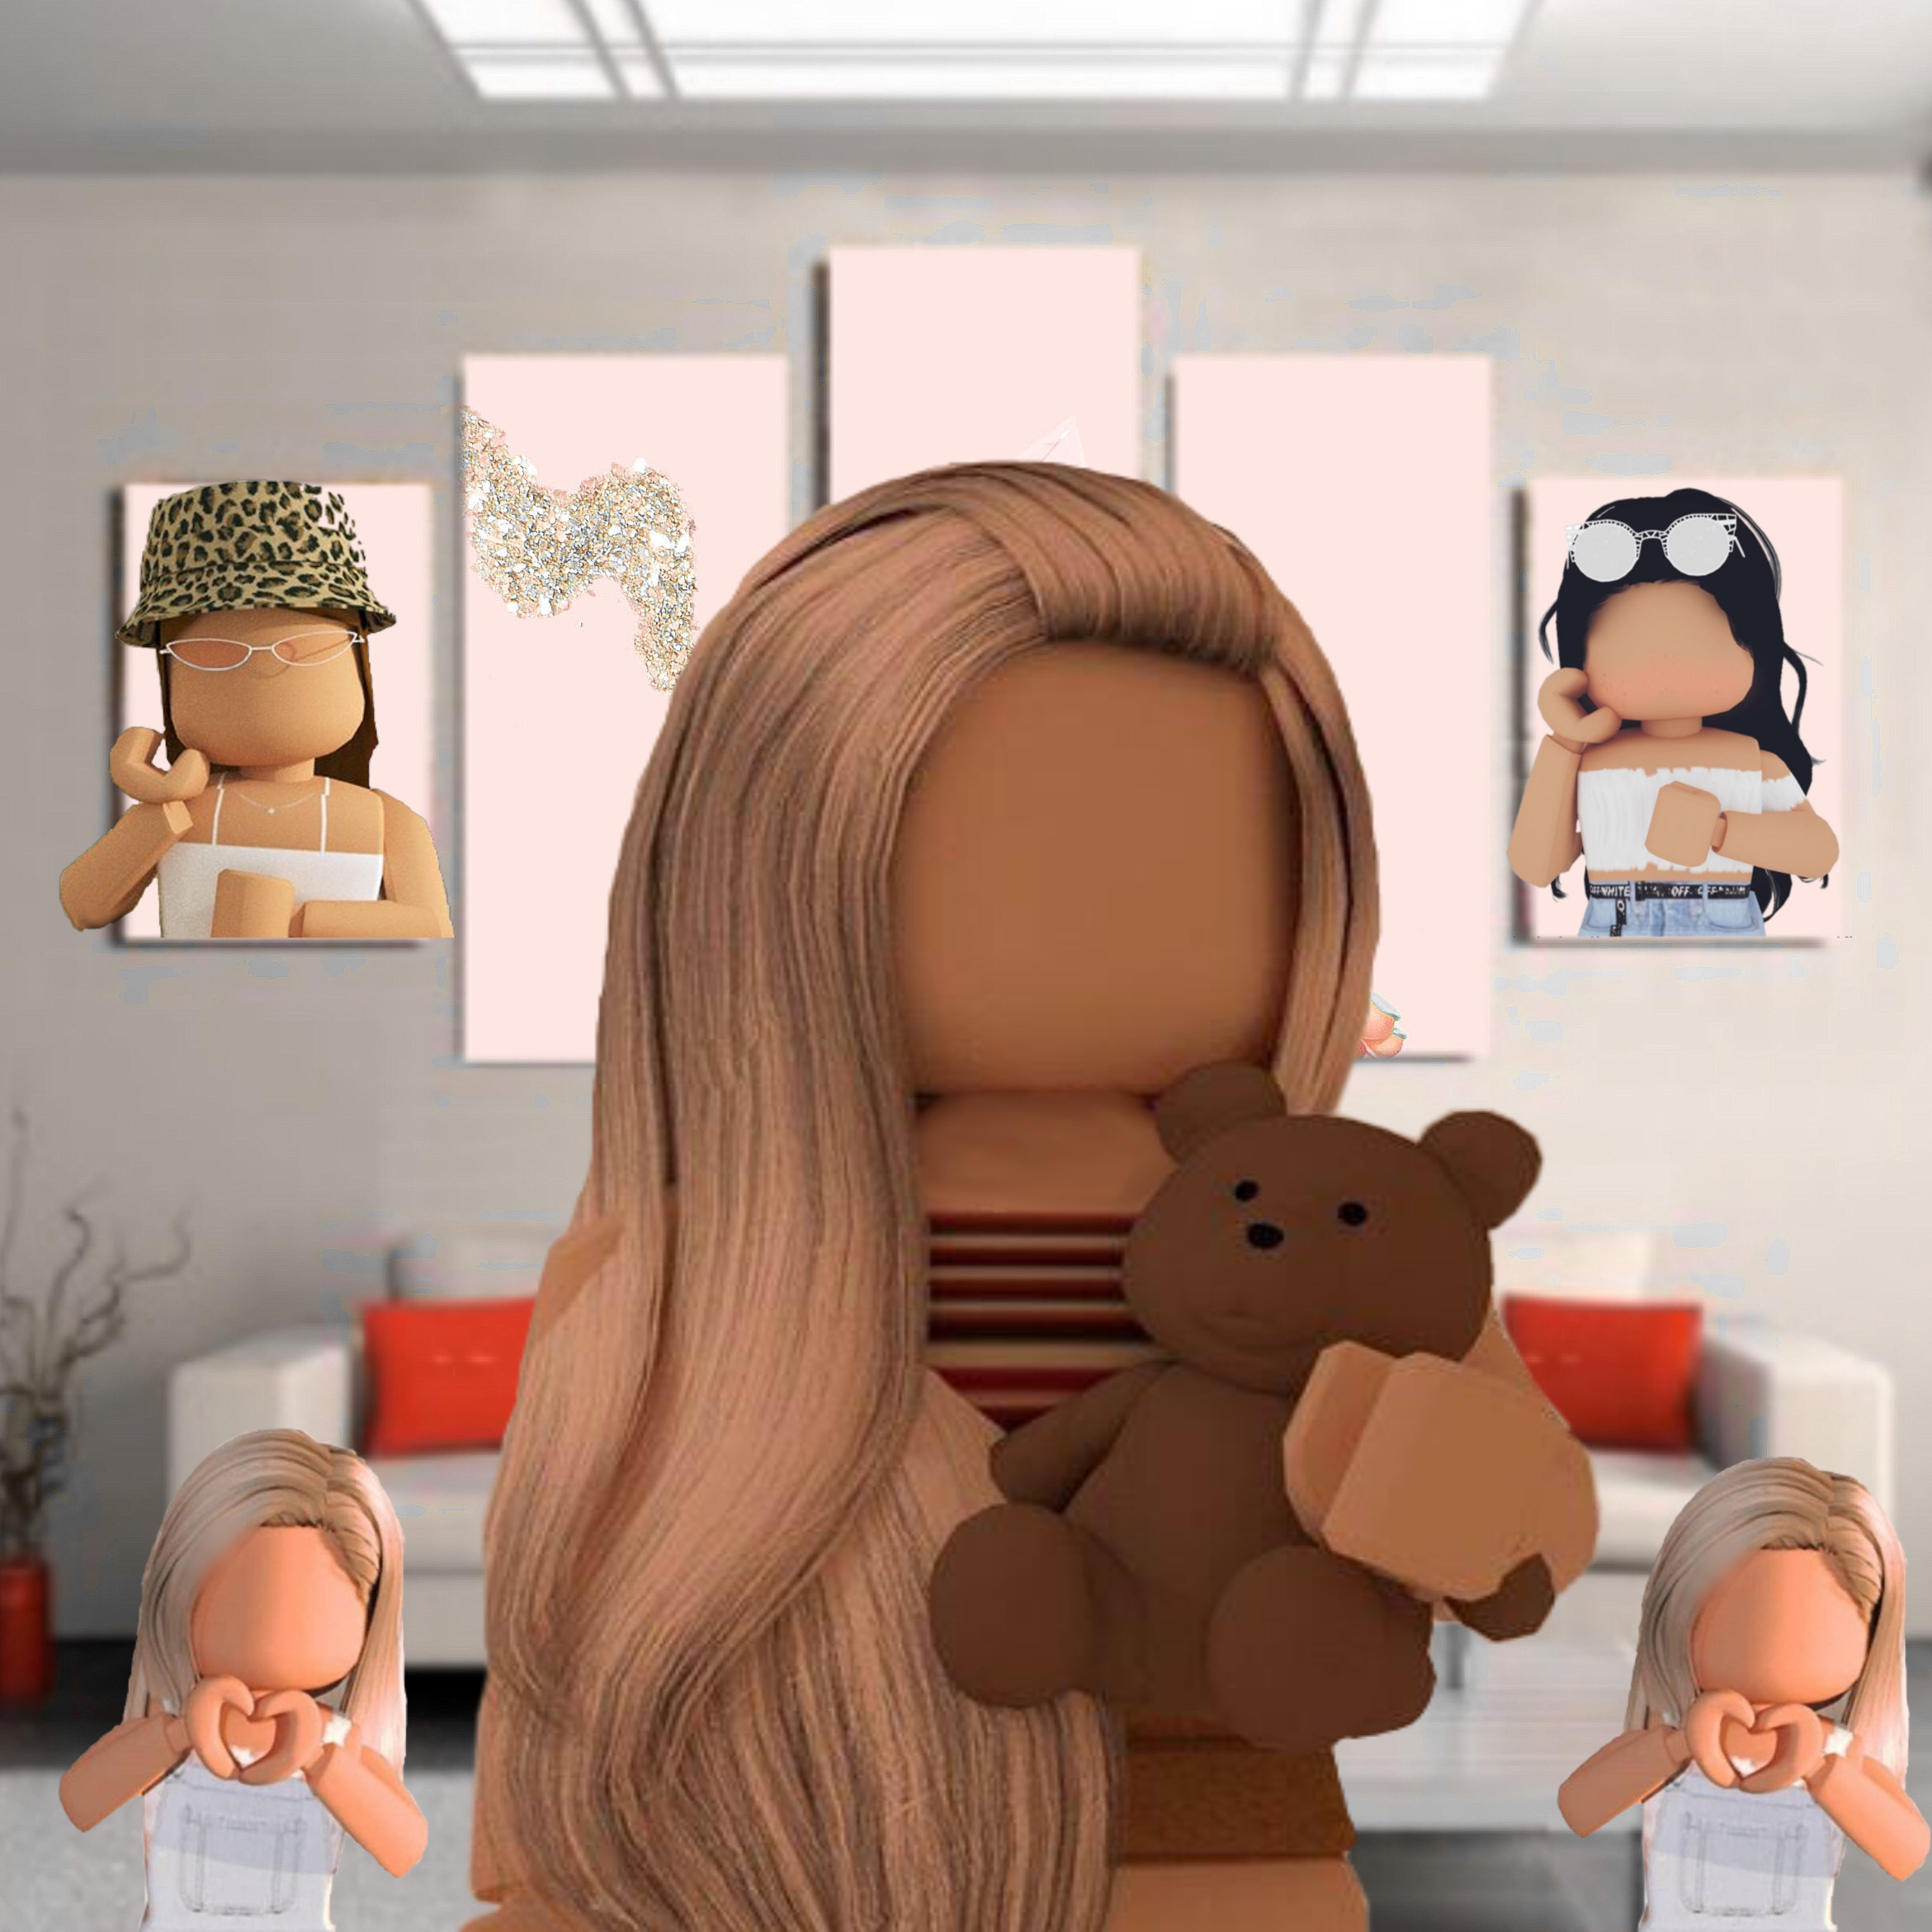 Roblox Pictures No Faces